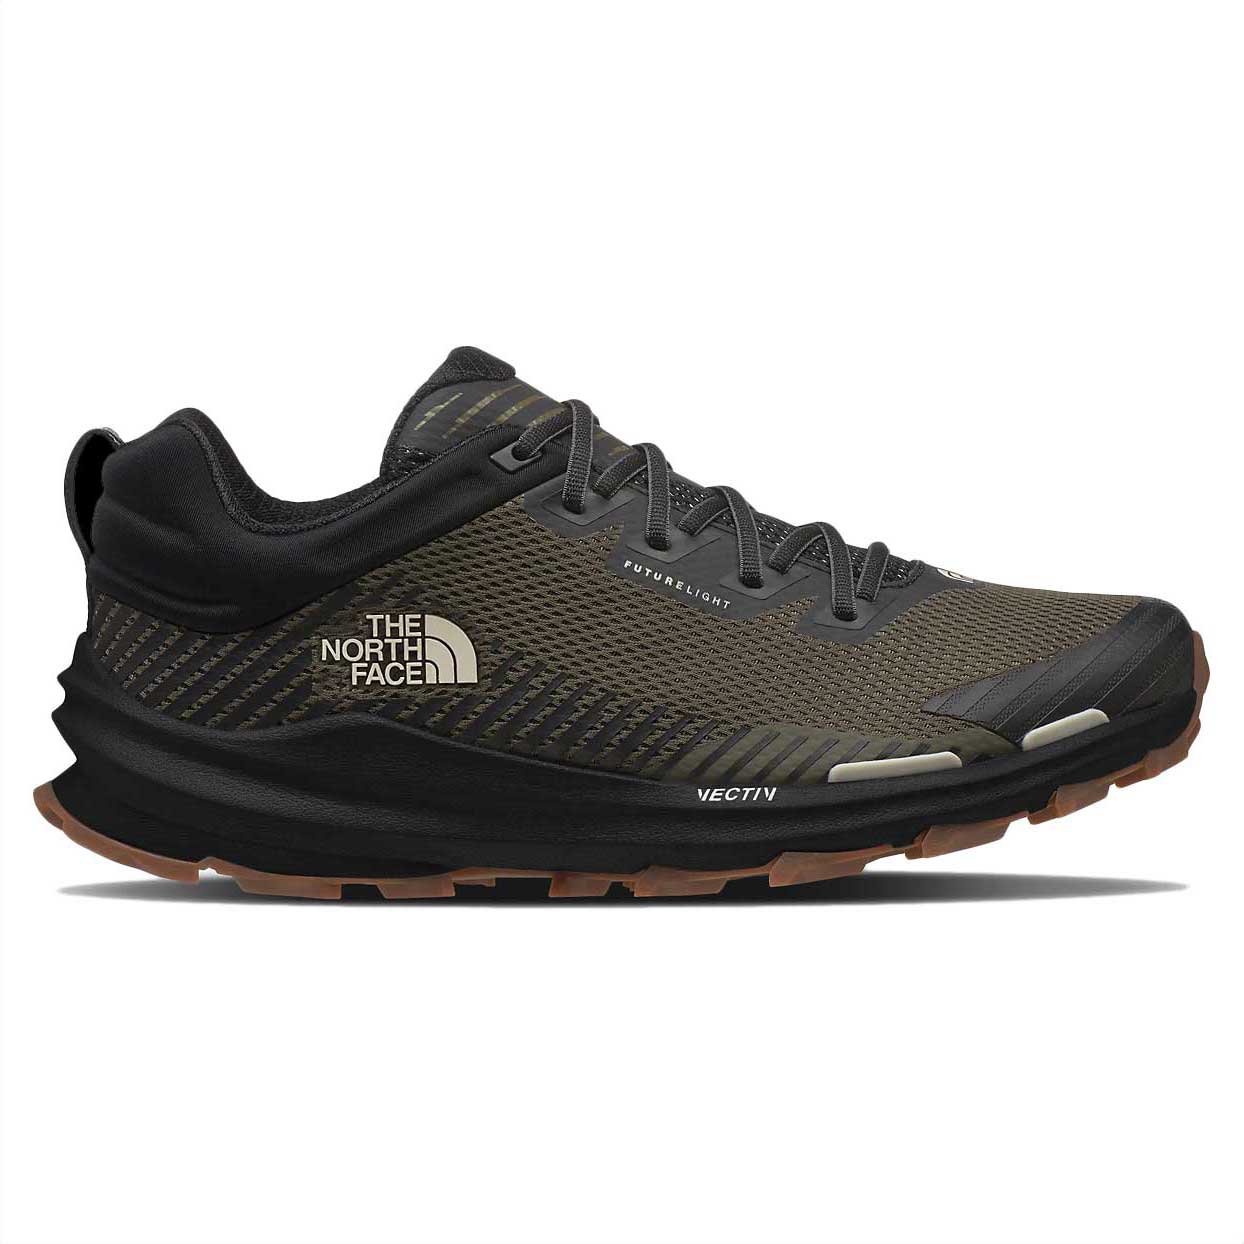 THE NORTH FACE OUTDOOR The North Face TRAVERSE VELOCITY KNIT WP - Outdoor  Shoes - Men's - black - Private Sport Shop